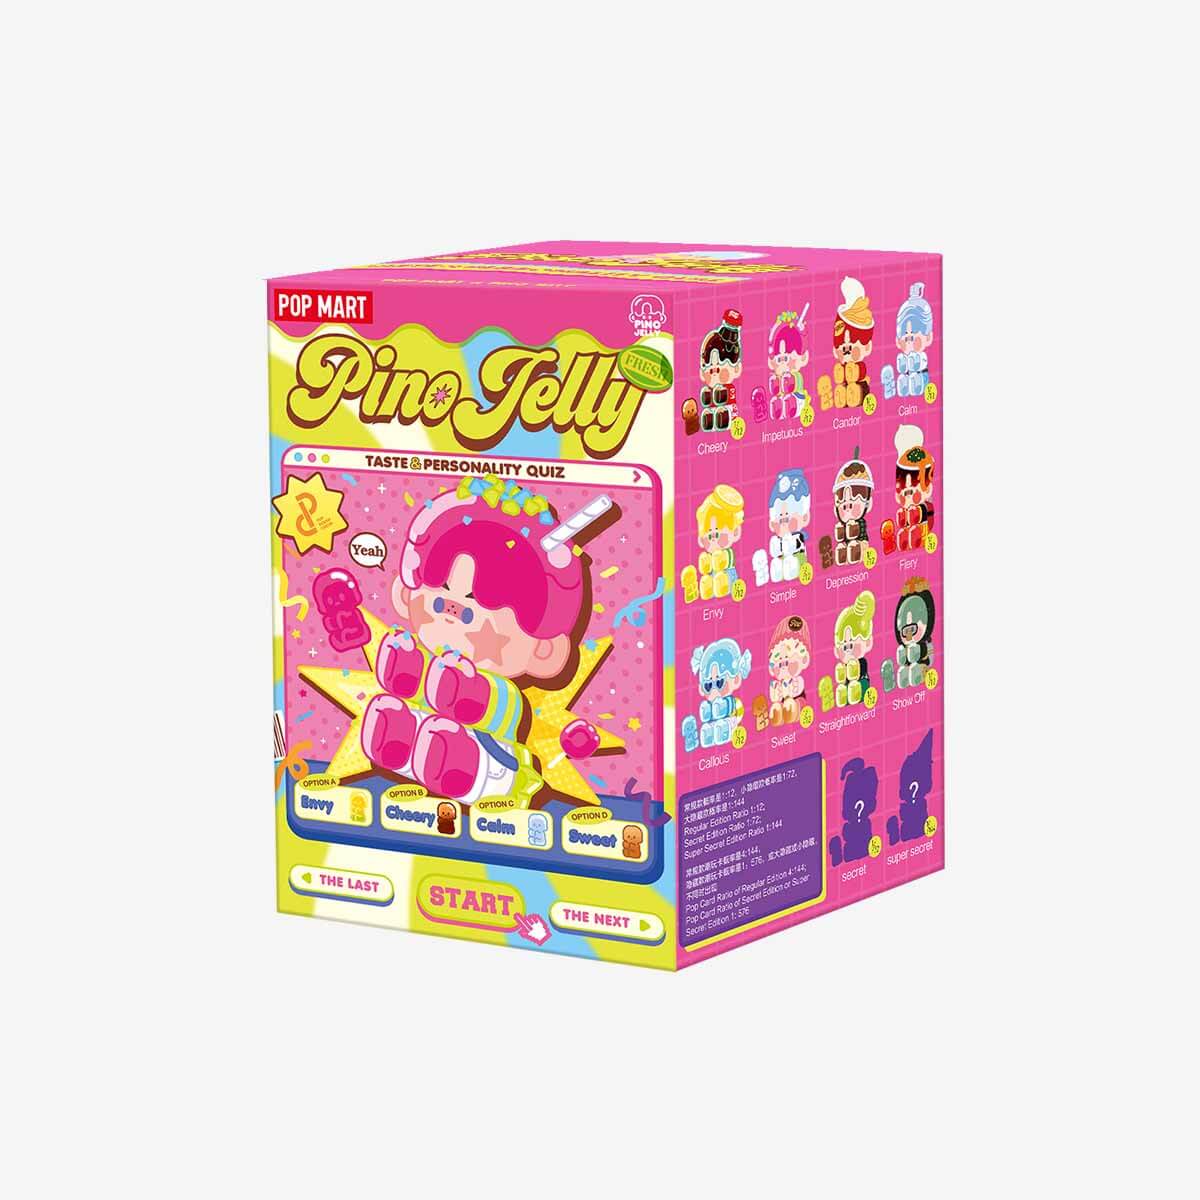 PINO JELLY Taste ＆ Personality Quiz Series Figures - Blind Box 